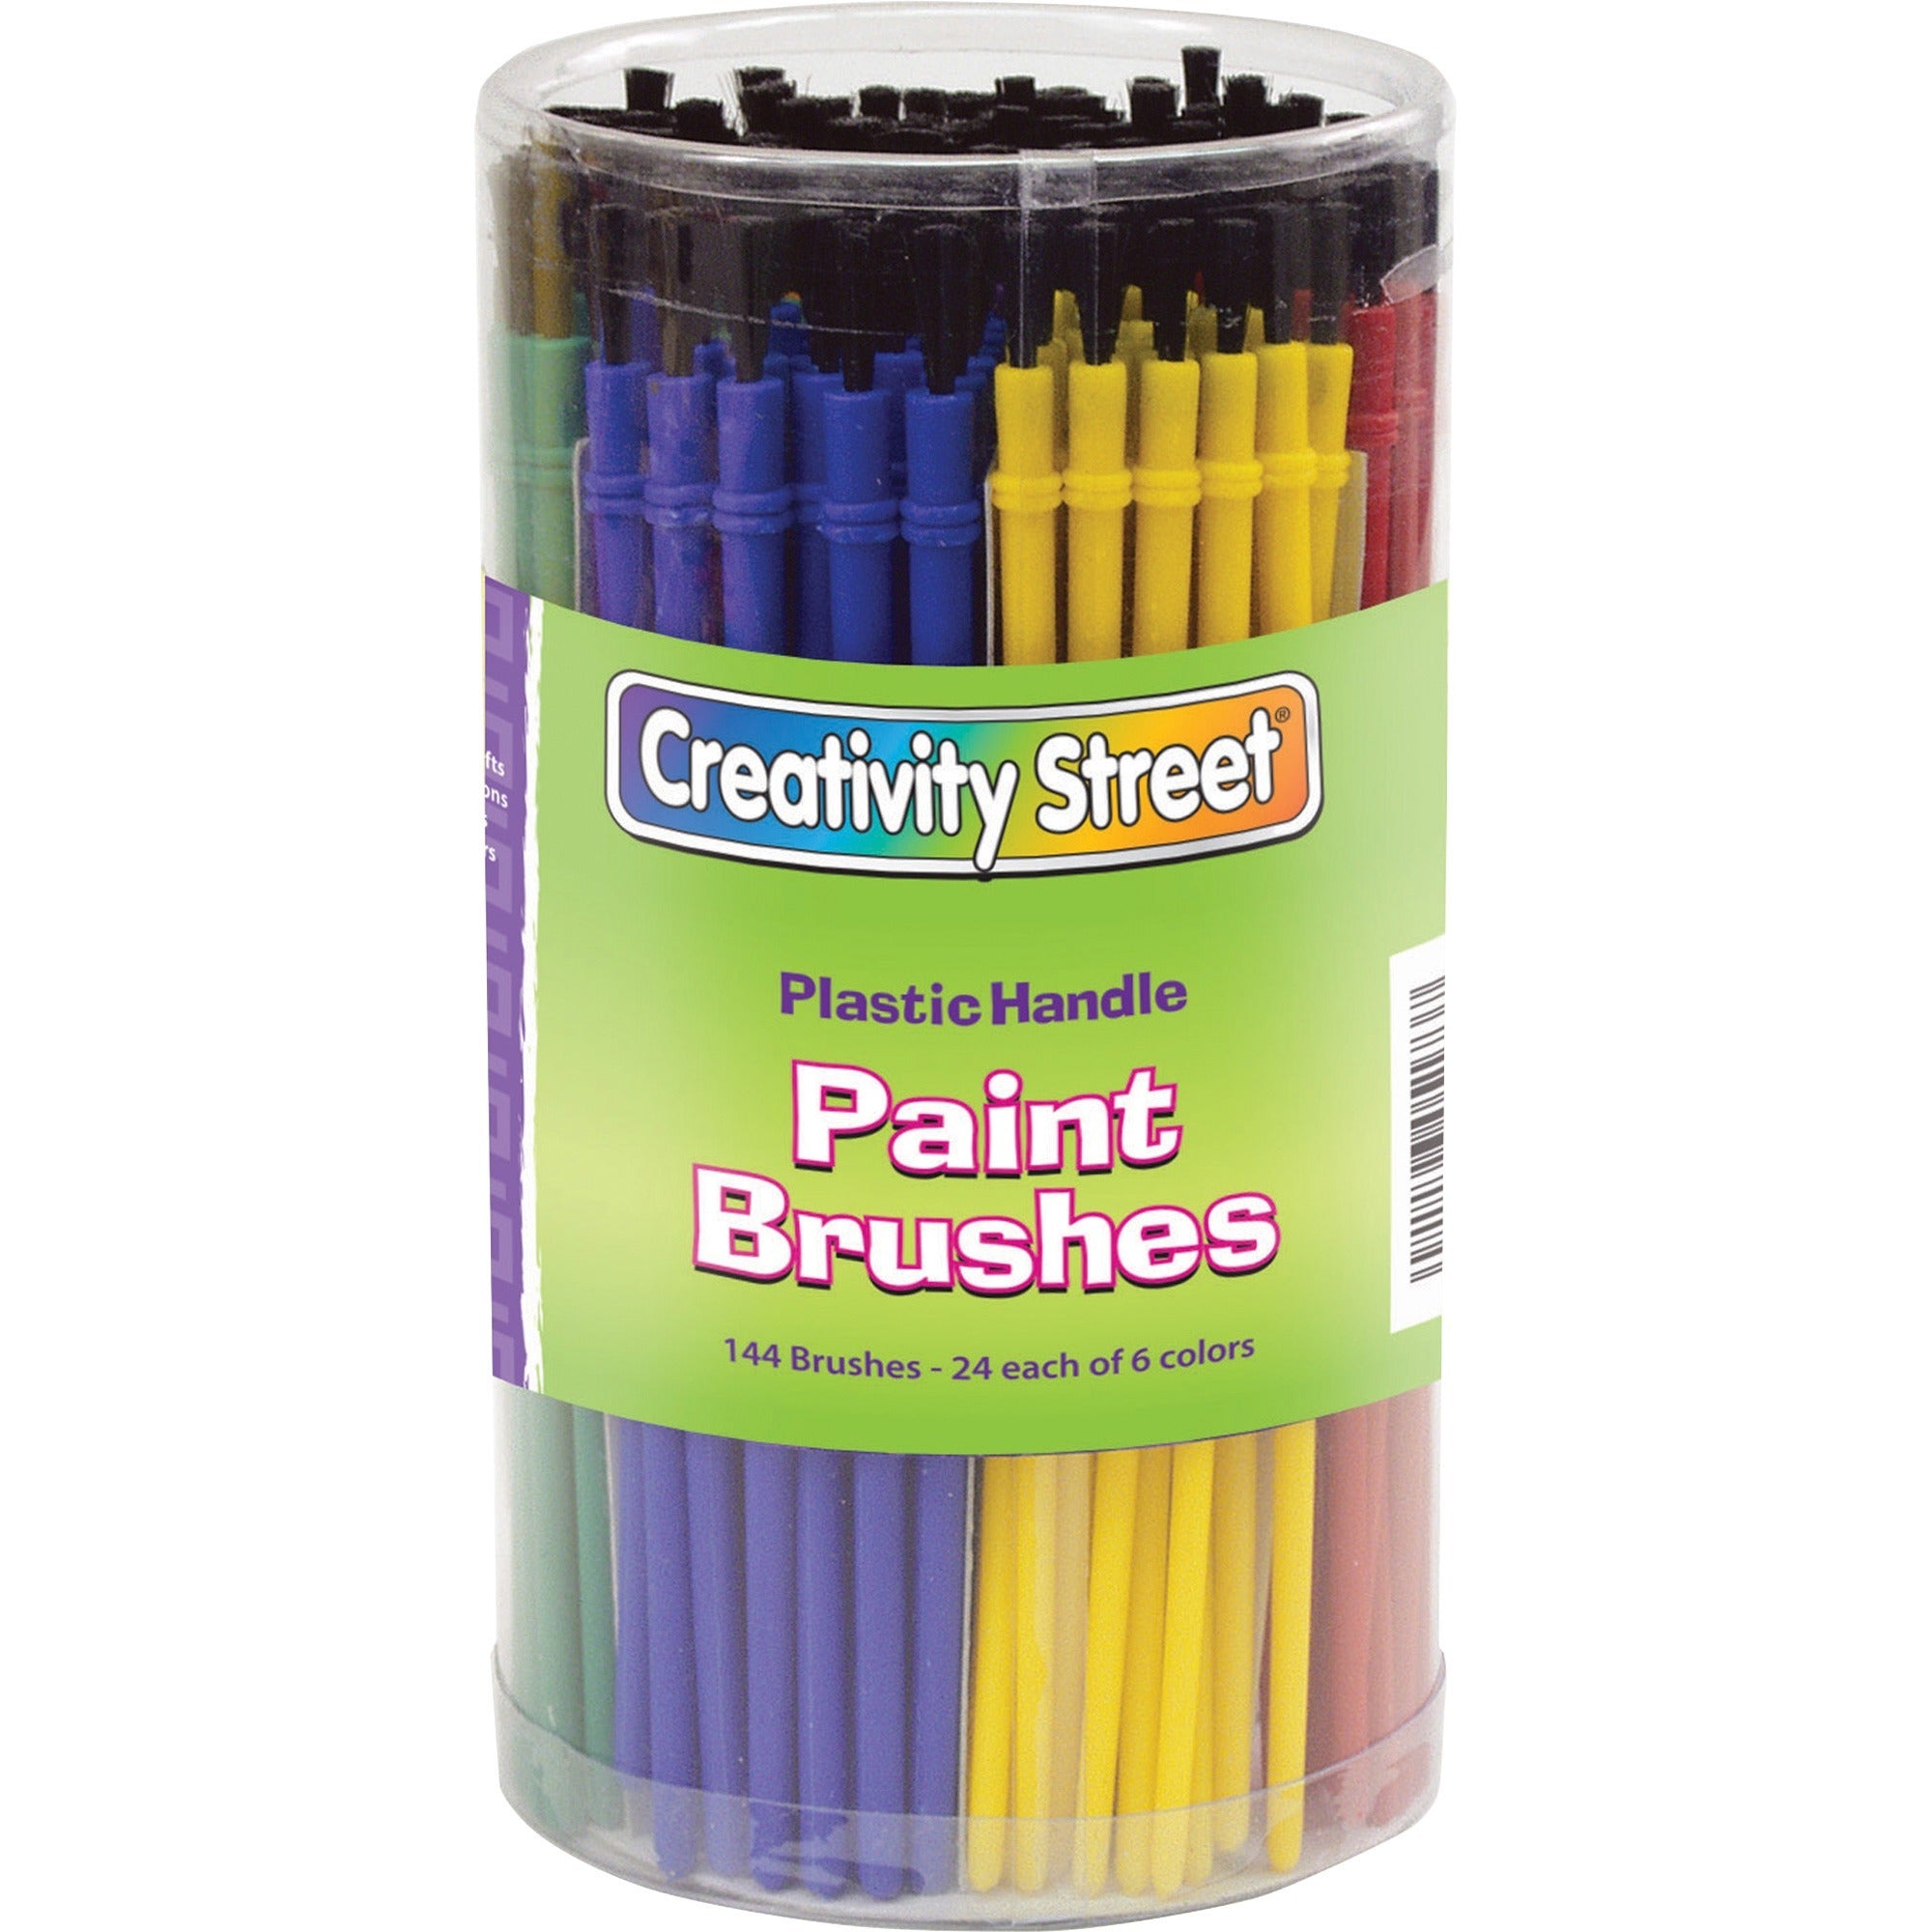 Creativity Street Canister of Paint Brushes - 144 Brush(es) Plastic - 